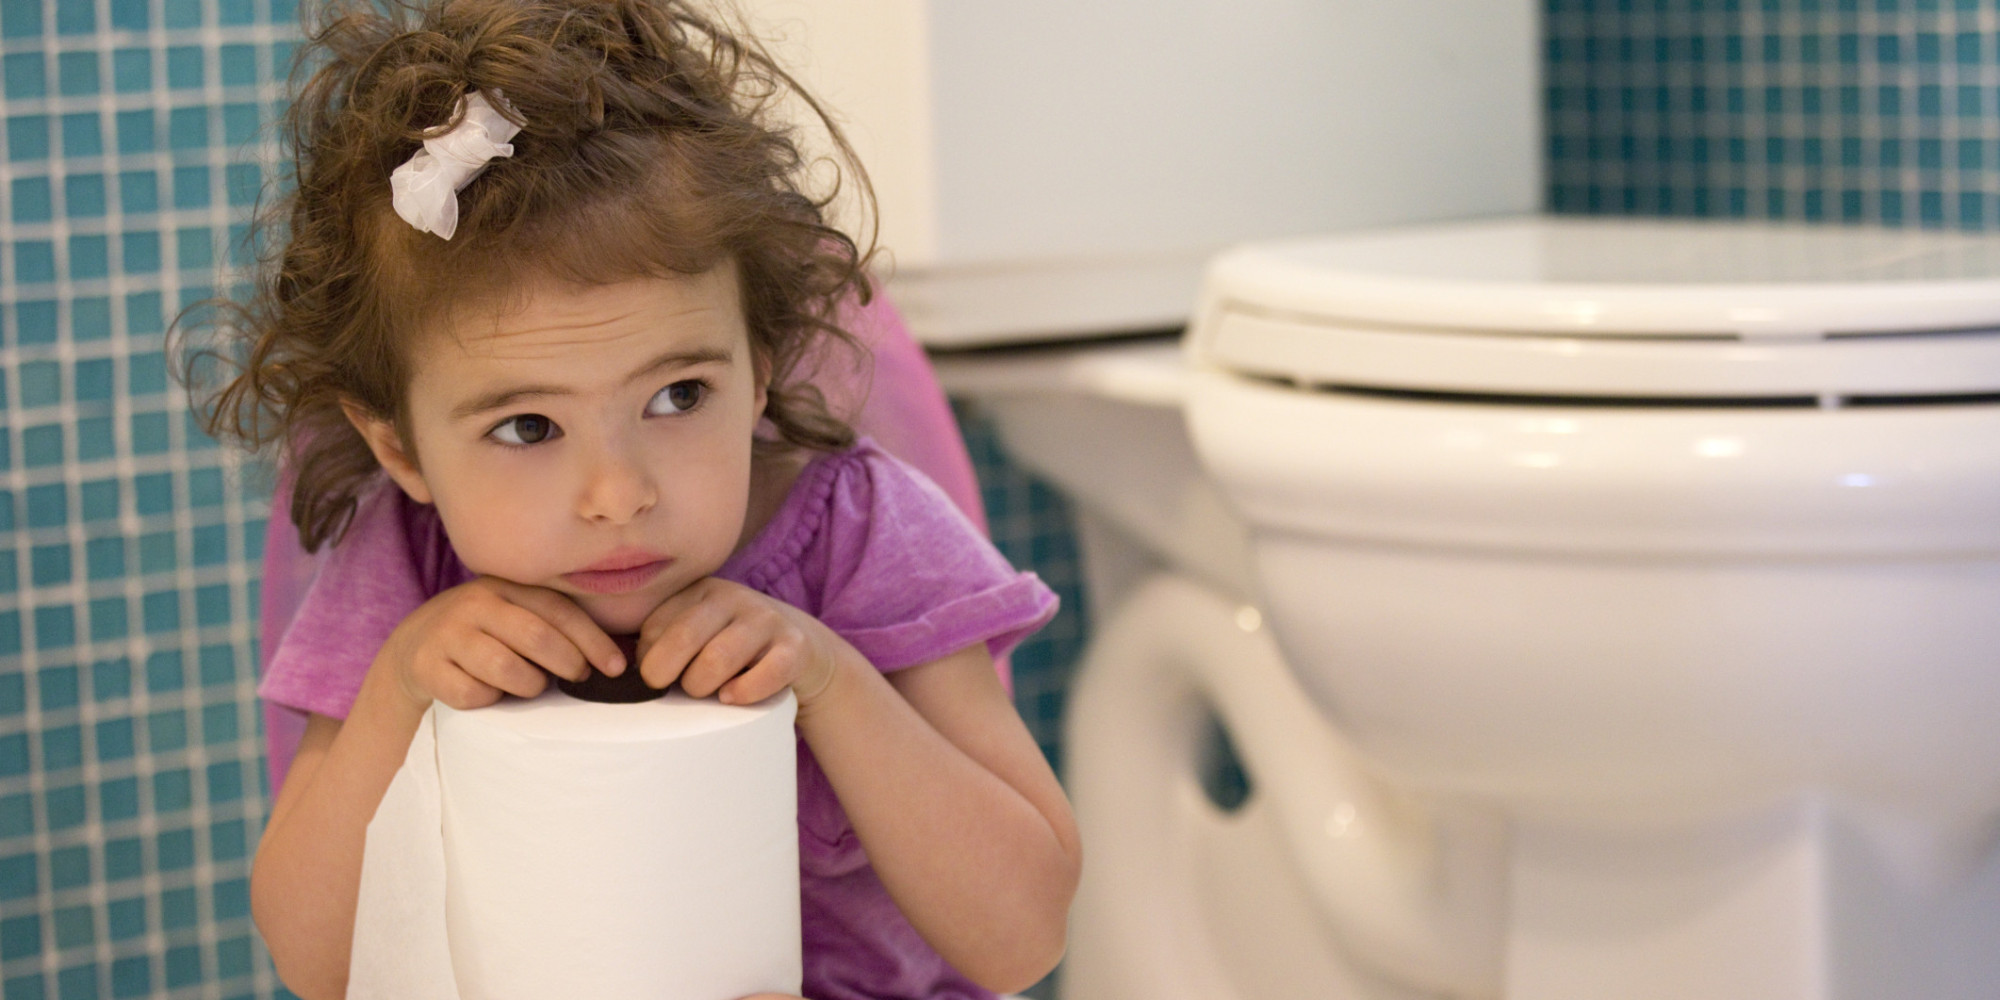 What Can Pelvic Floor Physiotherapy Do For My Stuck Poos?